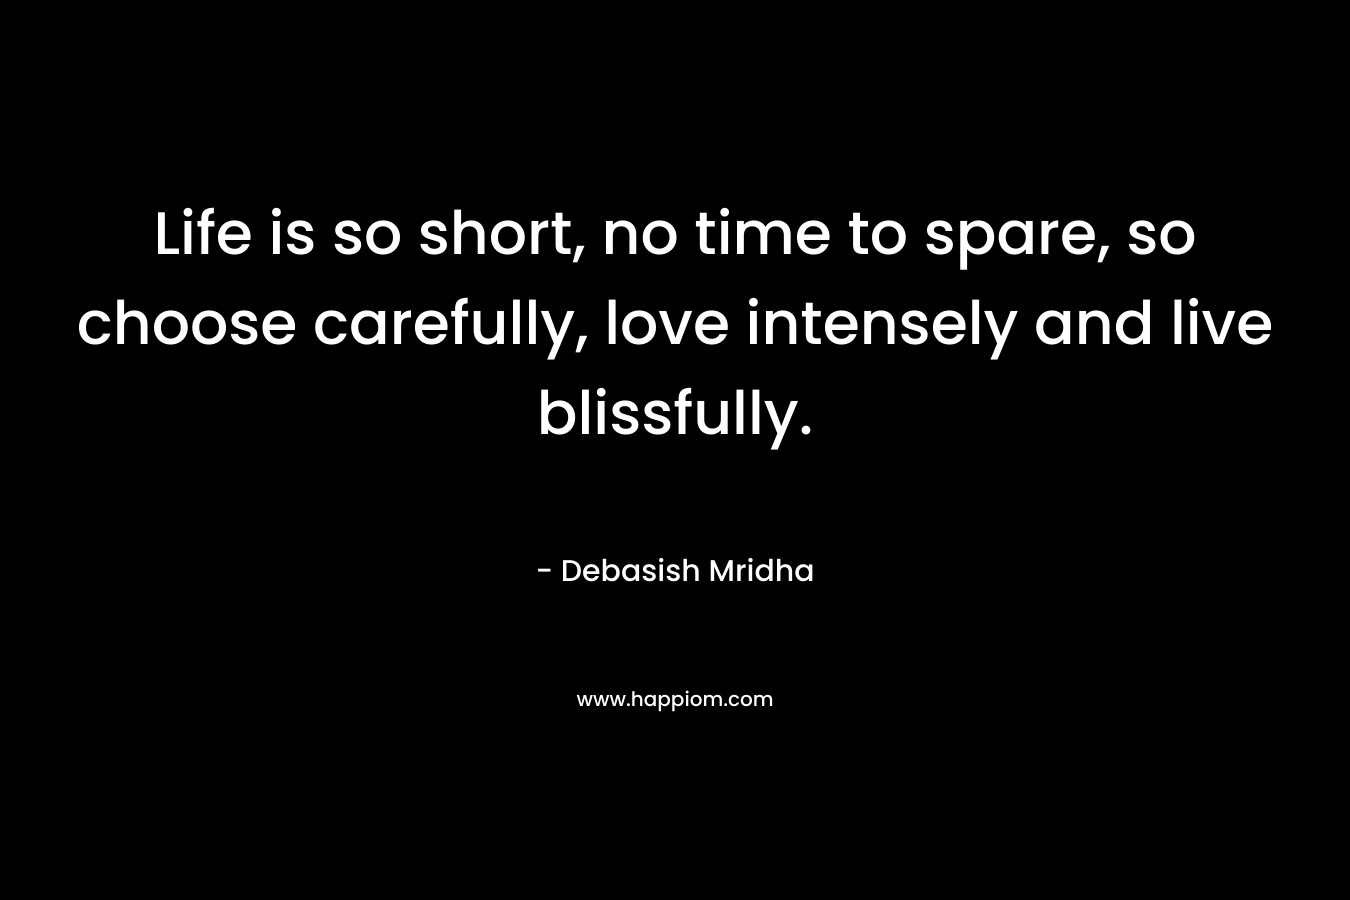 Life is so short, no time to spare, so choose carefully, love intensely and live blissfully.